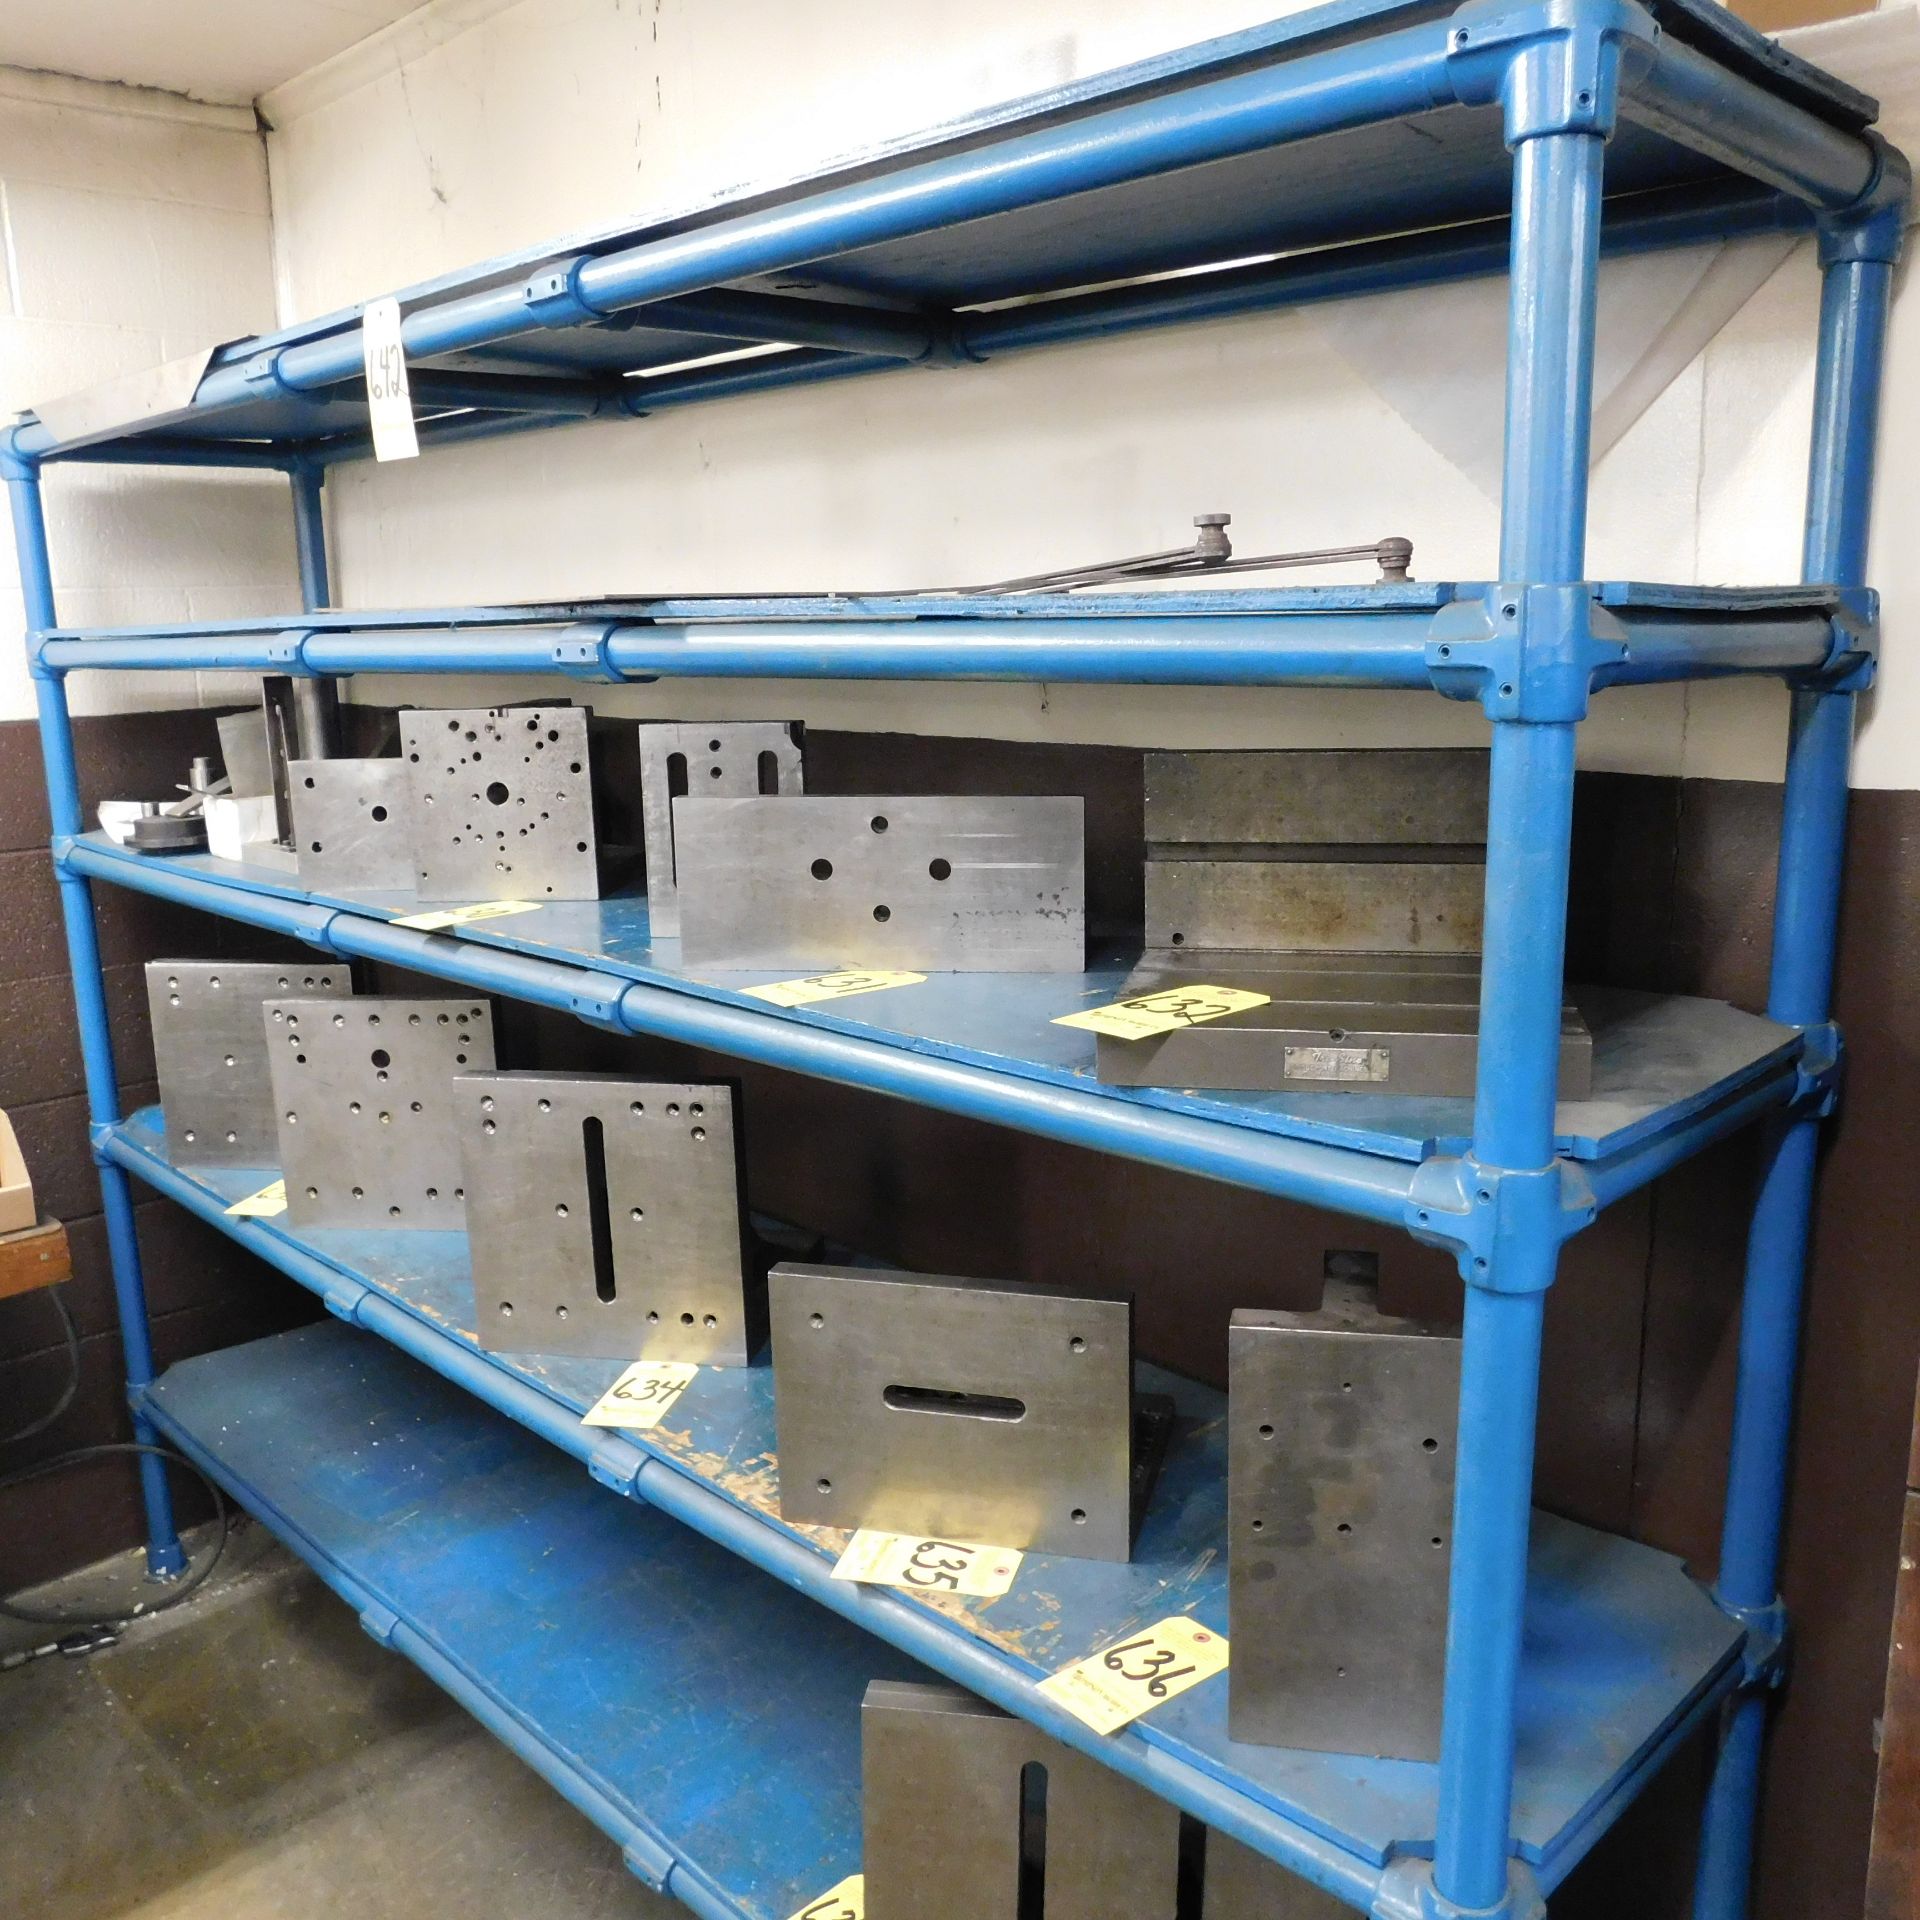 Steel Tubular Shelving, 93" X 18" X 74" Height, No Contents in Photo